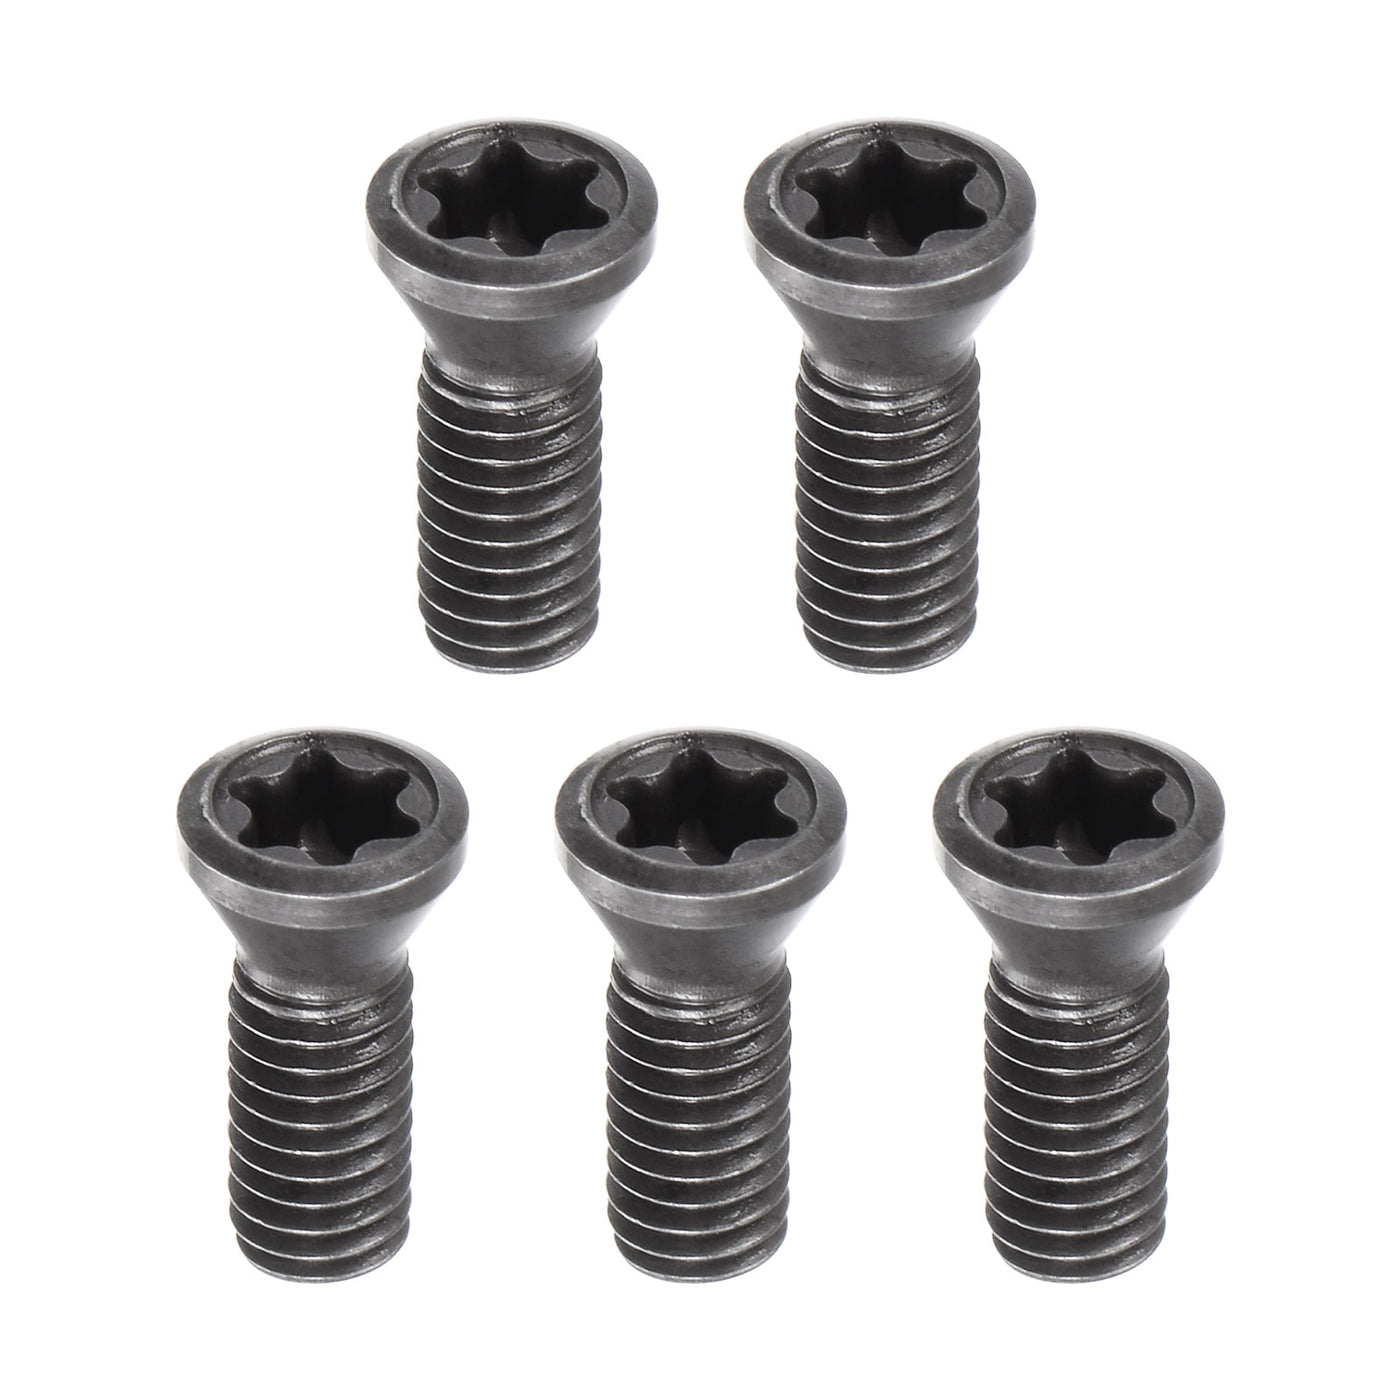 uxcell Uxcell M3.5x10-D5.3 Torx Set Screws for CNC Lathe Turning Tool Holder, 5Pcs